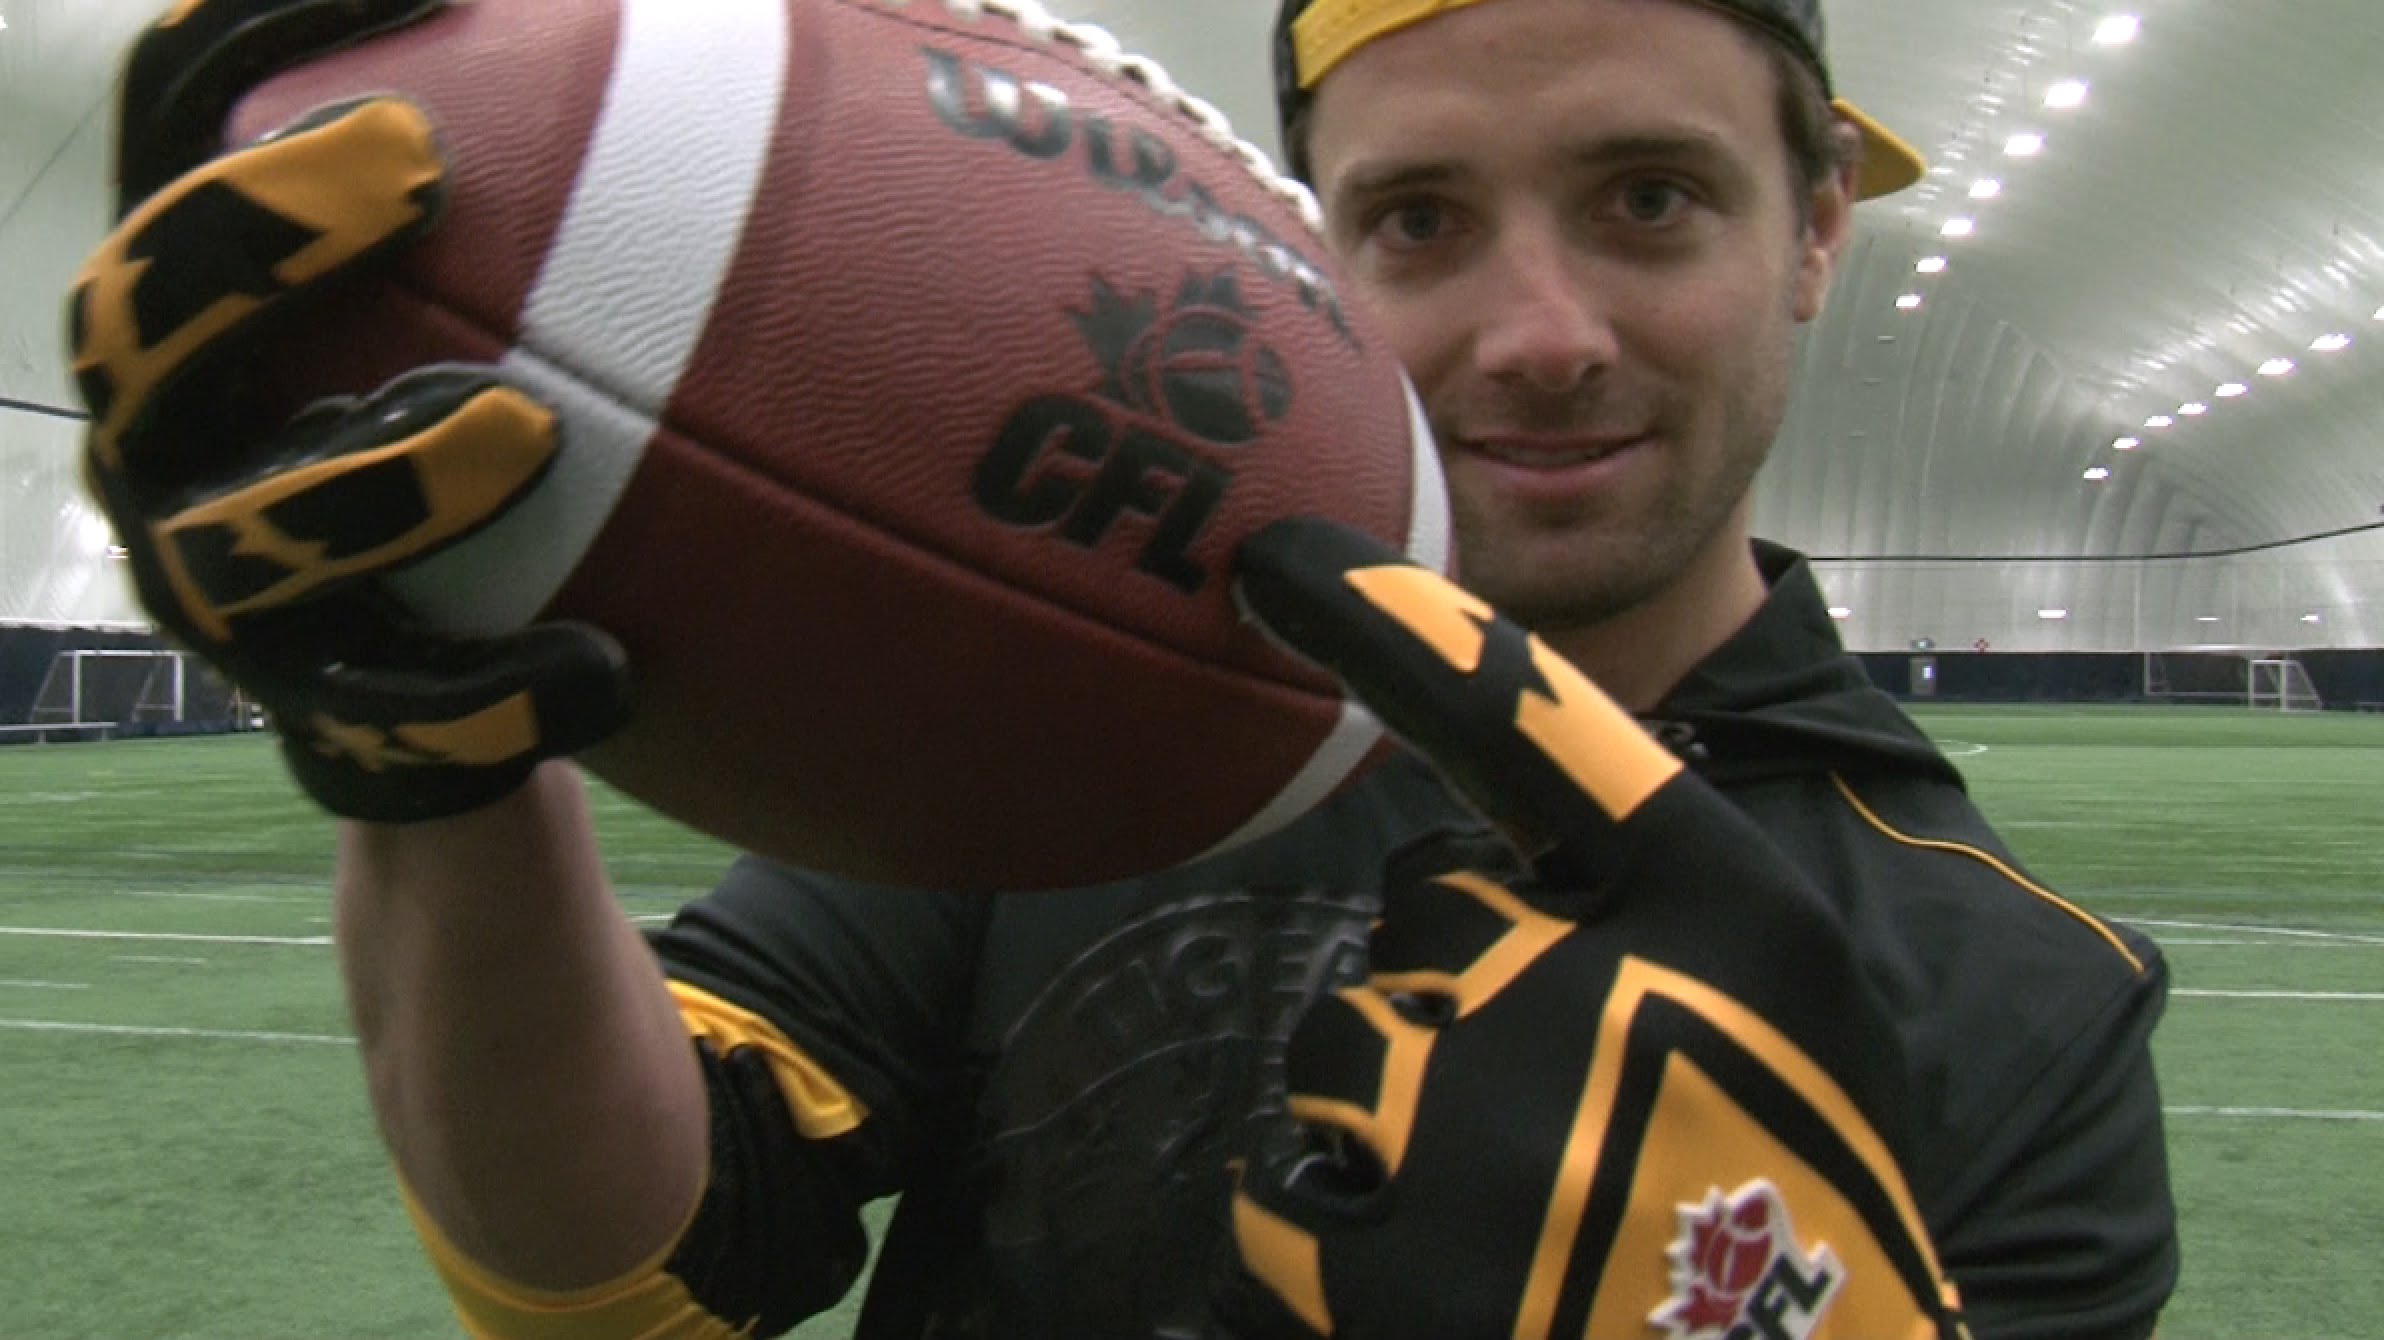 CFL receiver Andy Fantuz breaks one hand catch world record